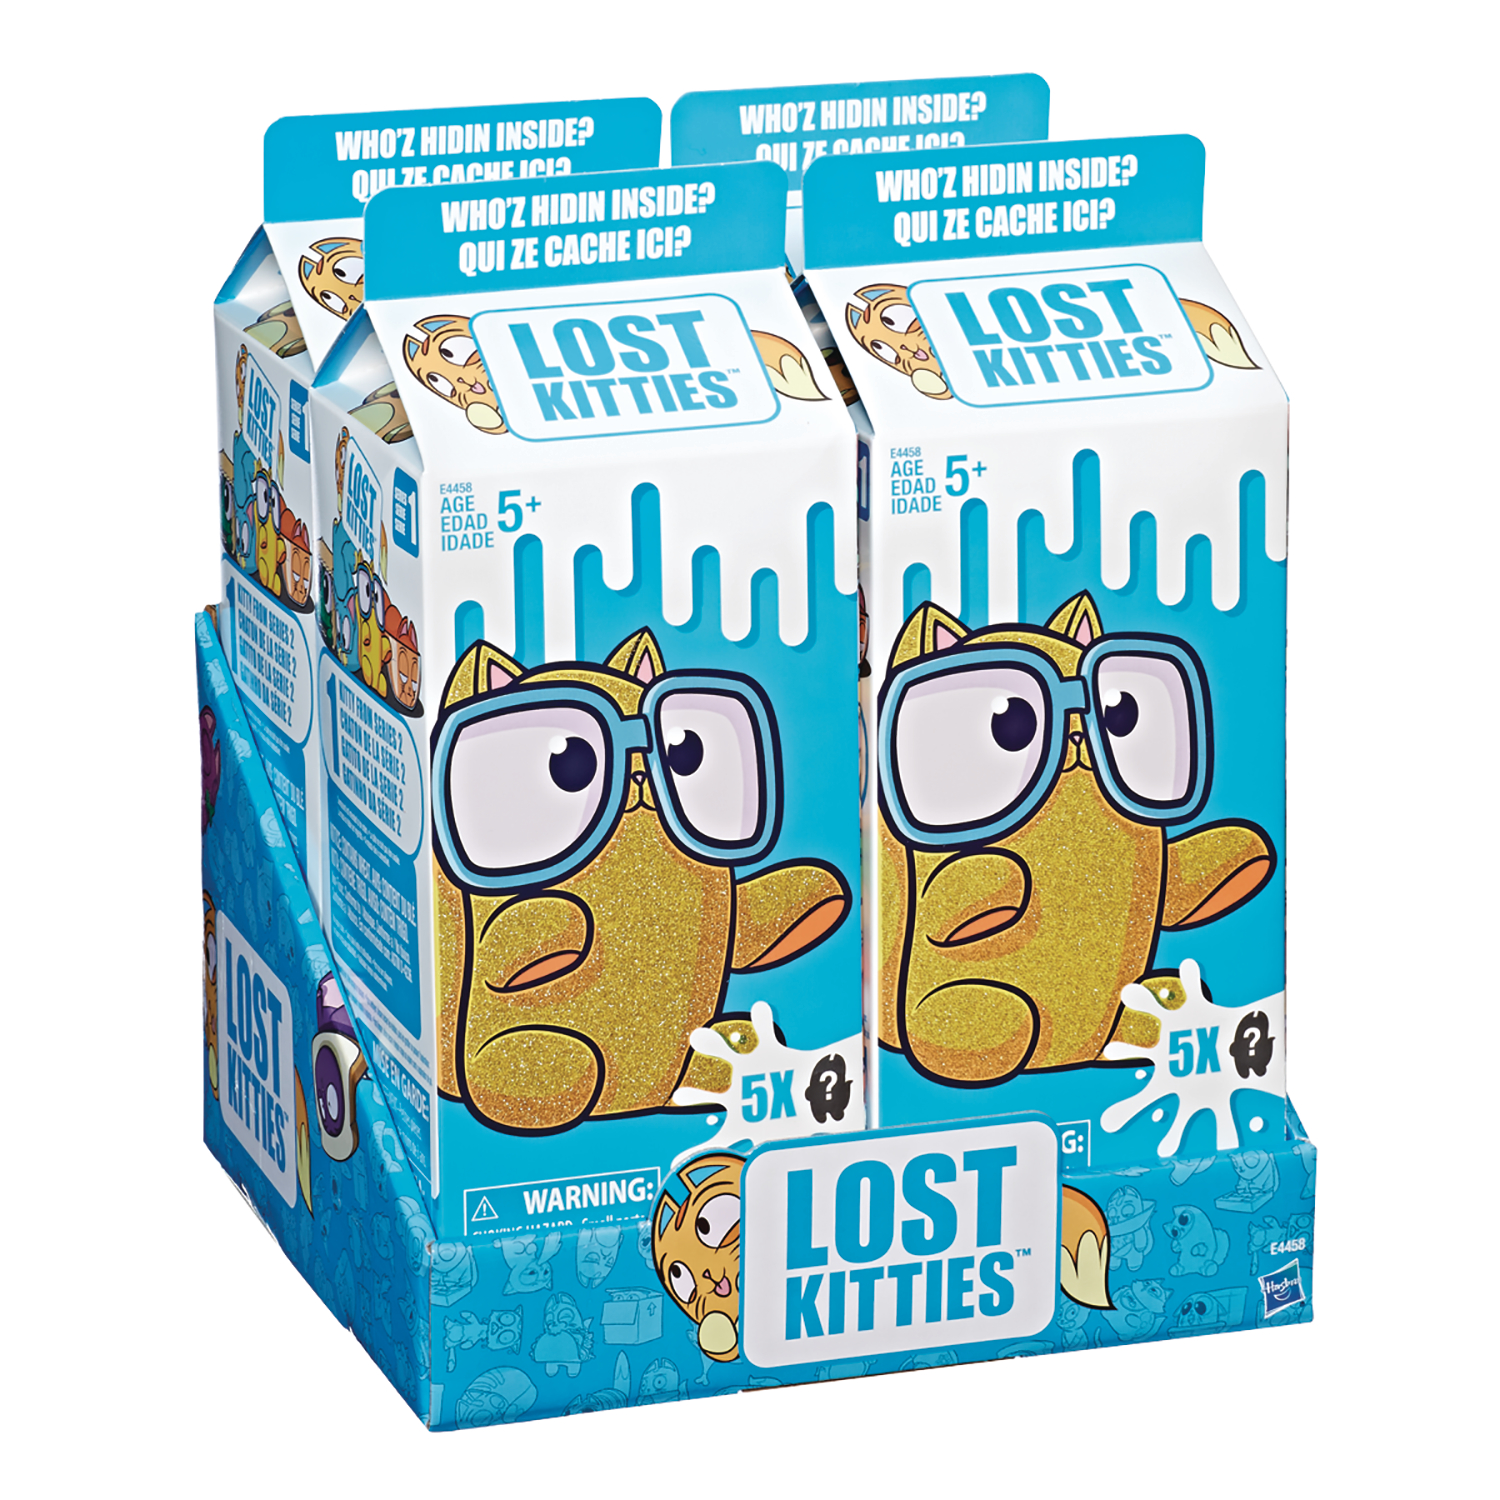 MAY188013 - LOST KITTIES MINI FIG MULTIPACK 4CT BMB DIS (Net) - Previews  World